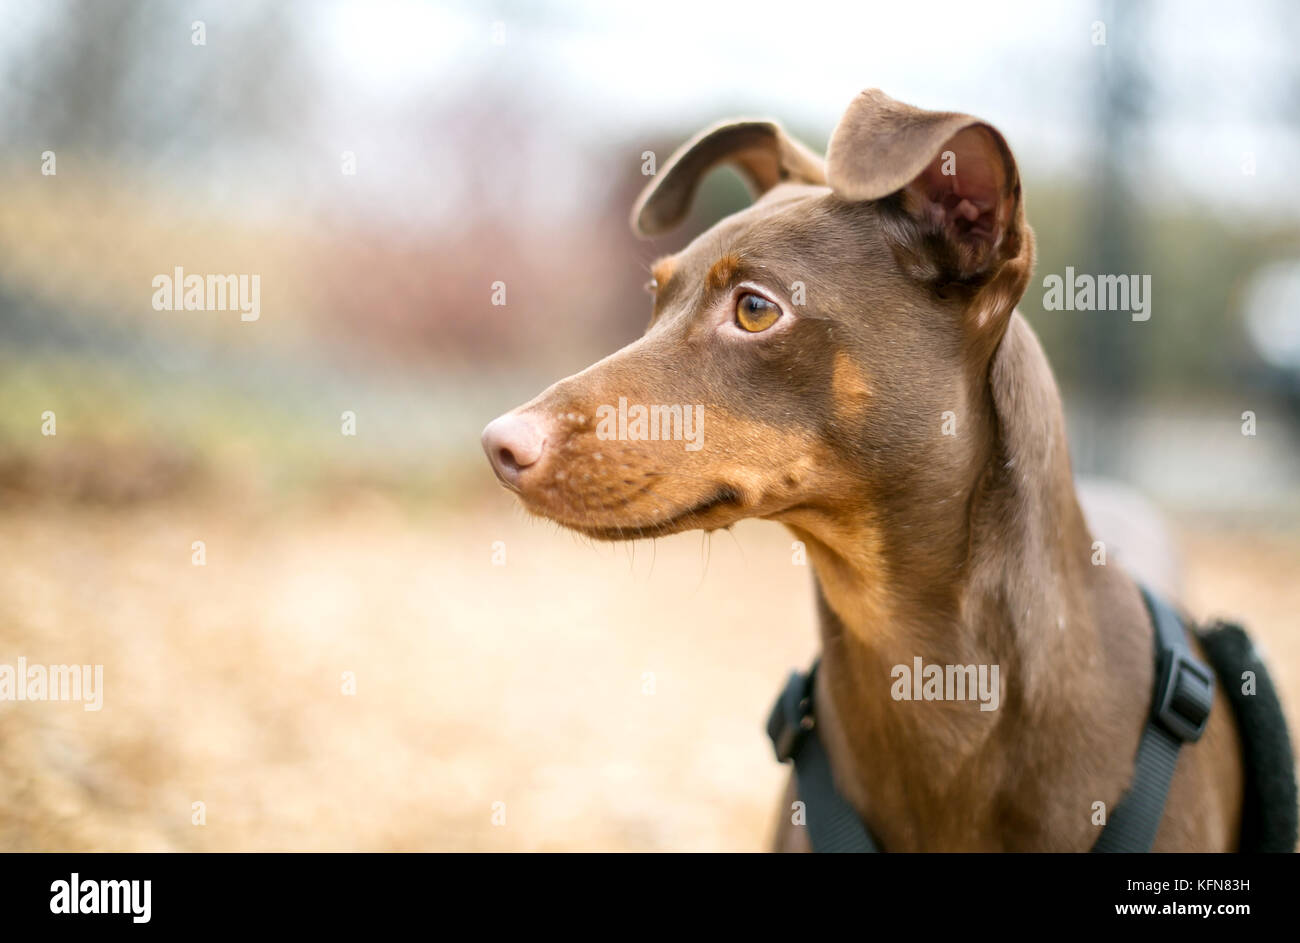 A chocolate and red Miniature Pinscher dog with natural uncropped ears Stock Photo